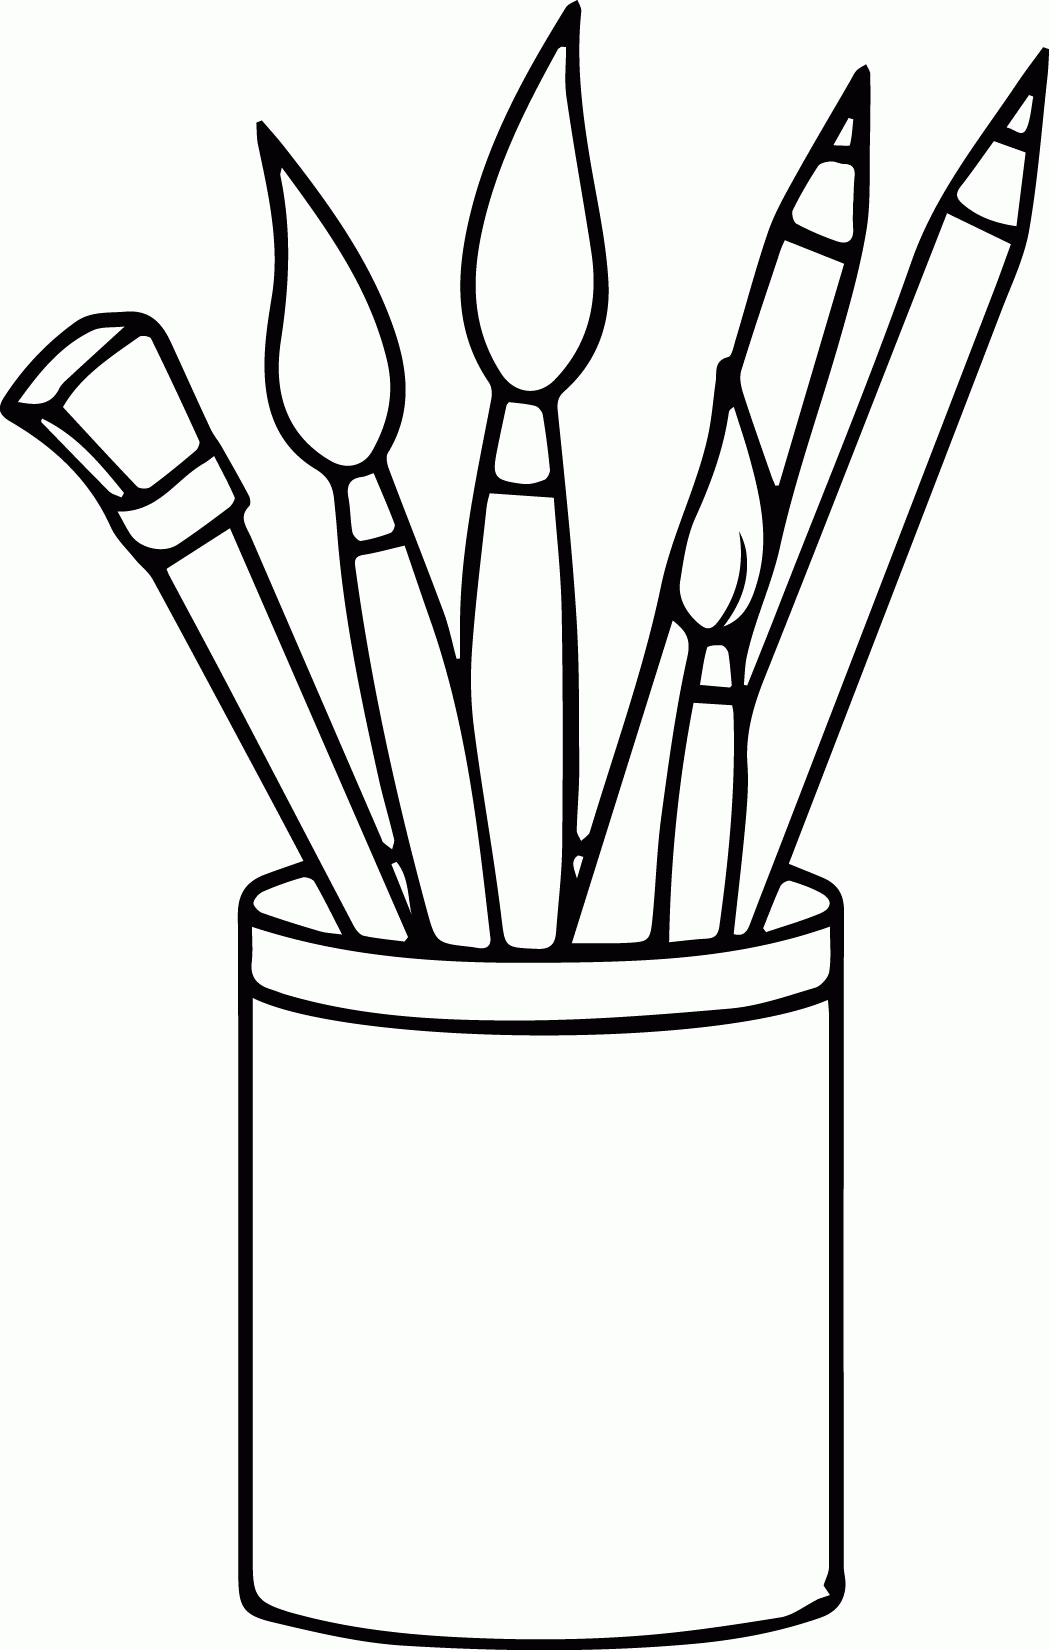 Art Supplies Pencils Paint Brushes Coloring Page Wecoloringpage